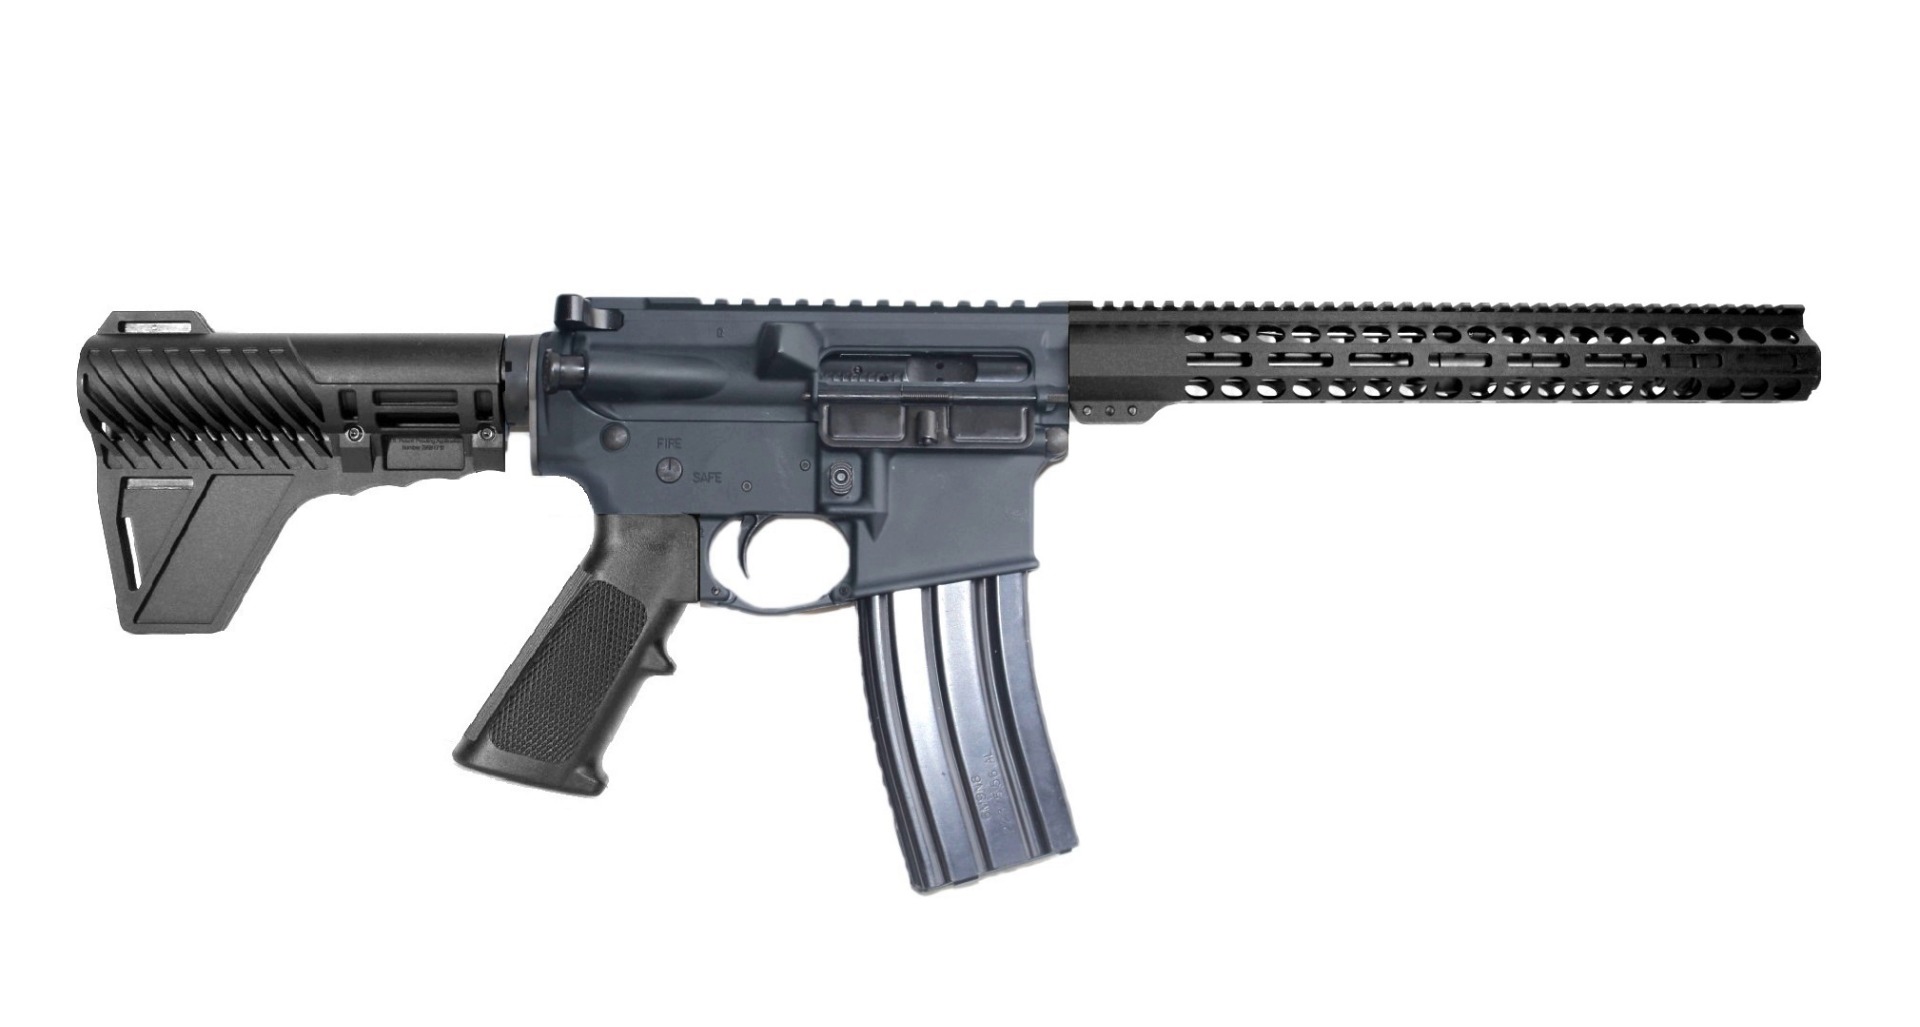 12.5 inch 5.56 NATO AR15 Pistol - Made in the USA